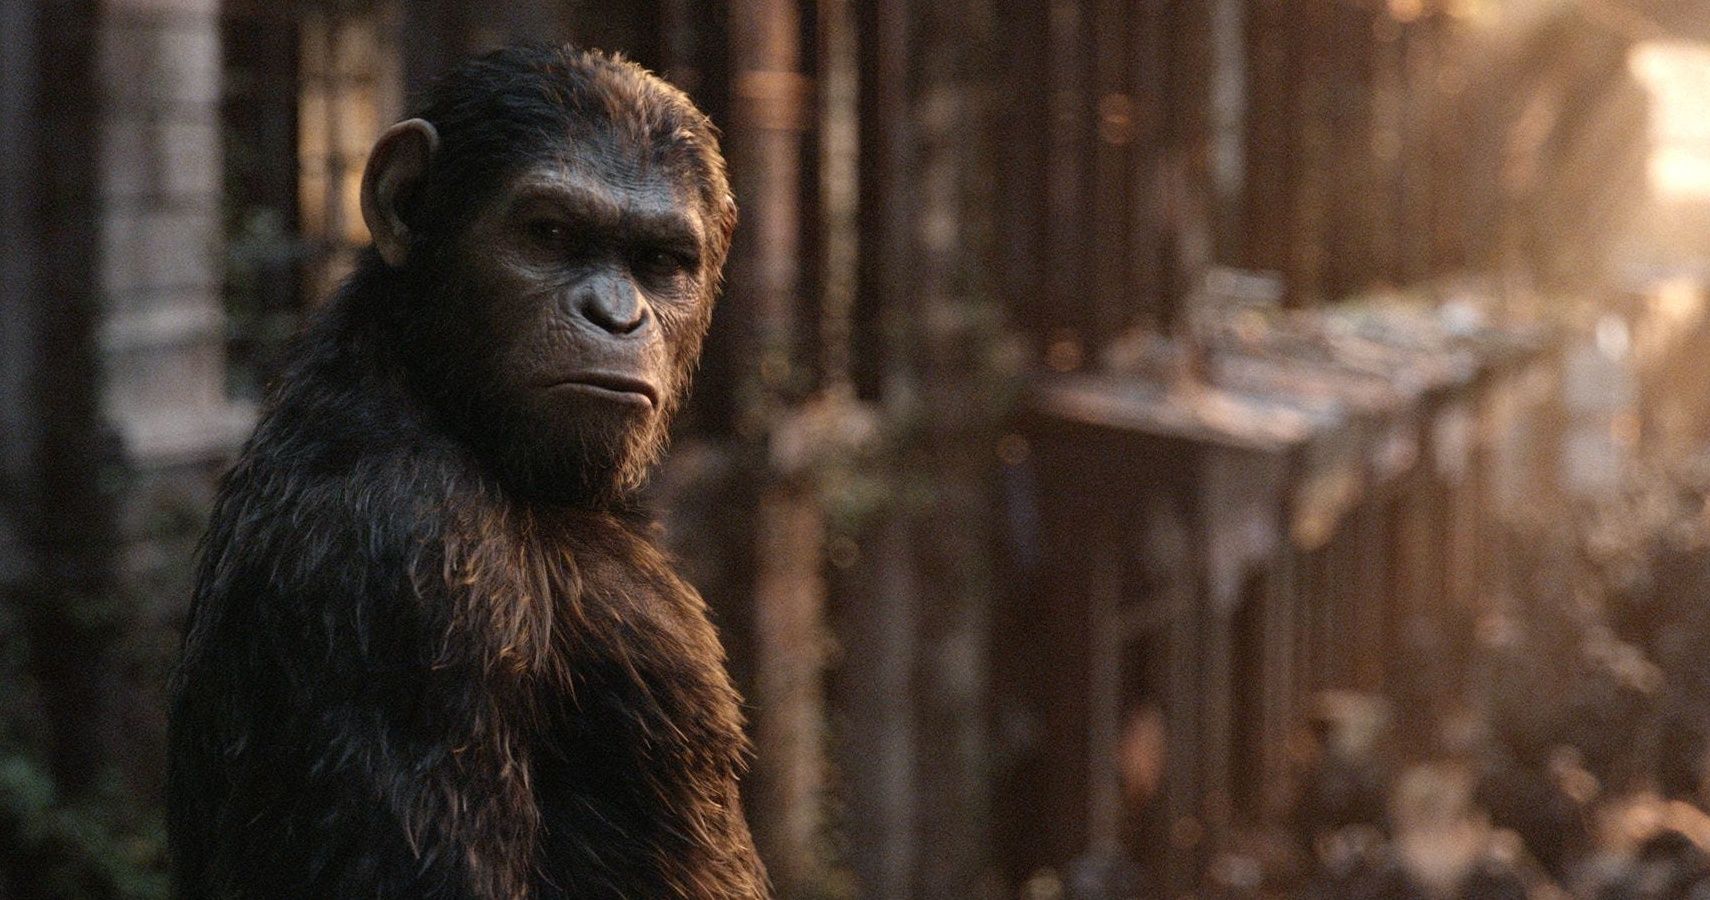 war for the planet of the apes full movie stream